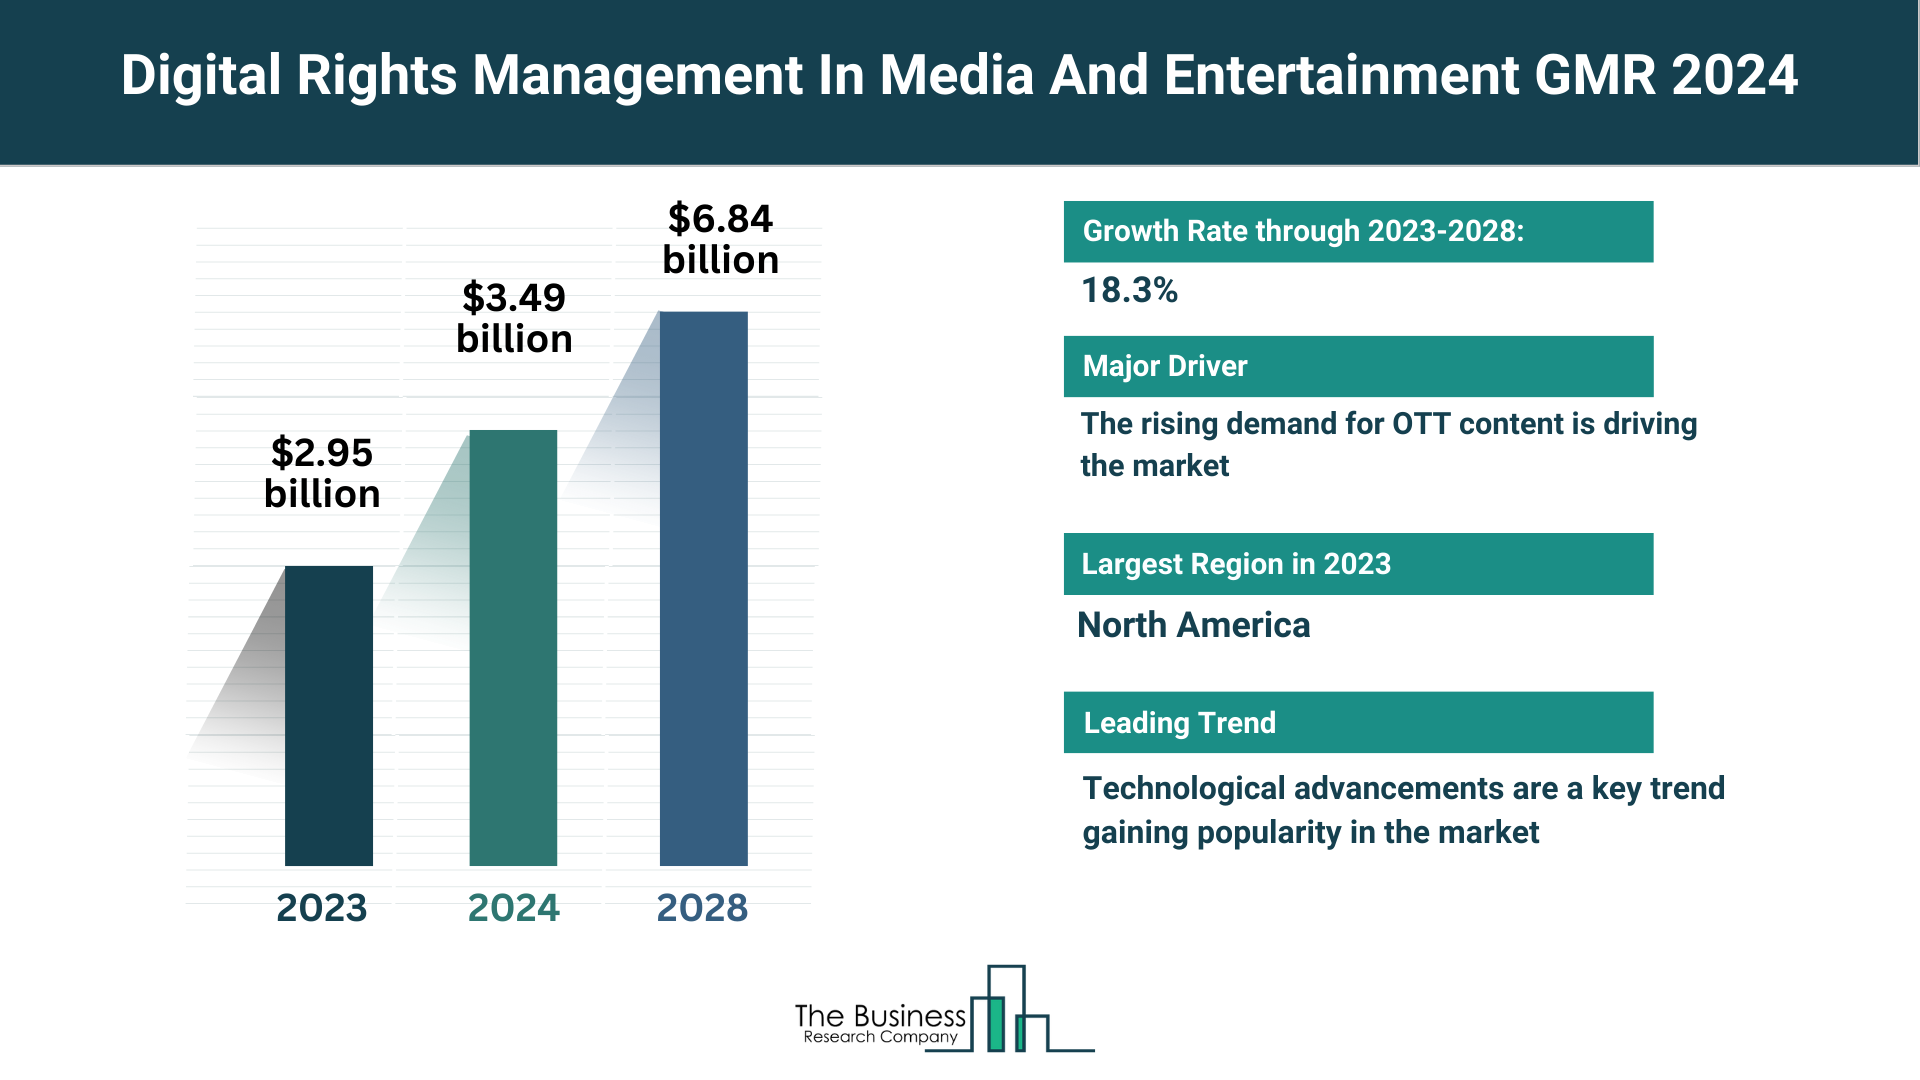 Global Digital Rights Management In Media And Entertainment Market